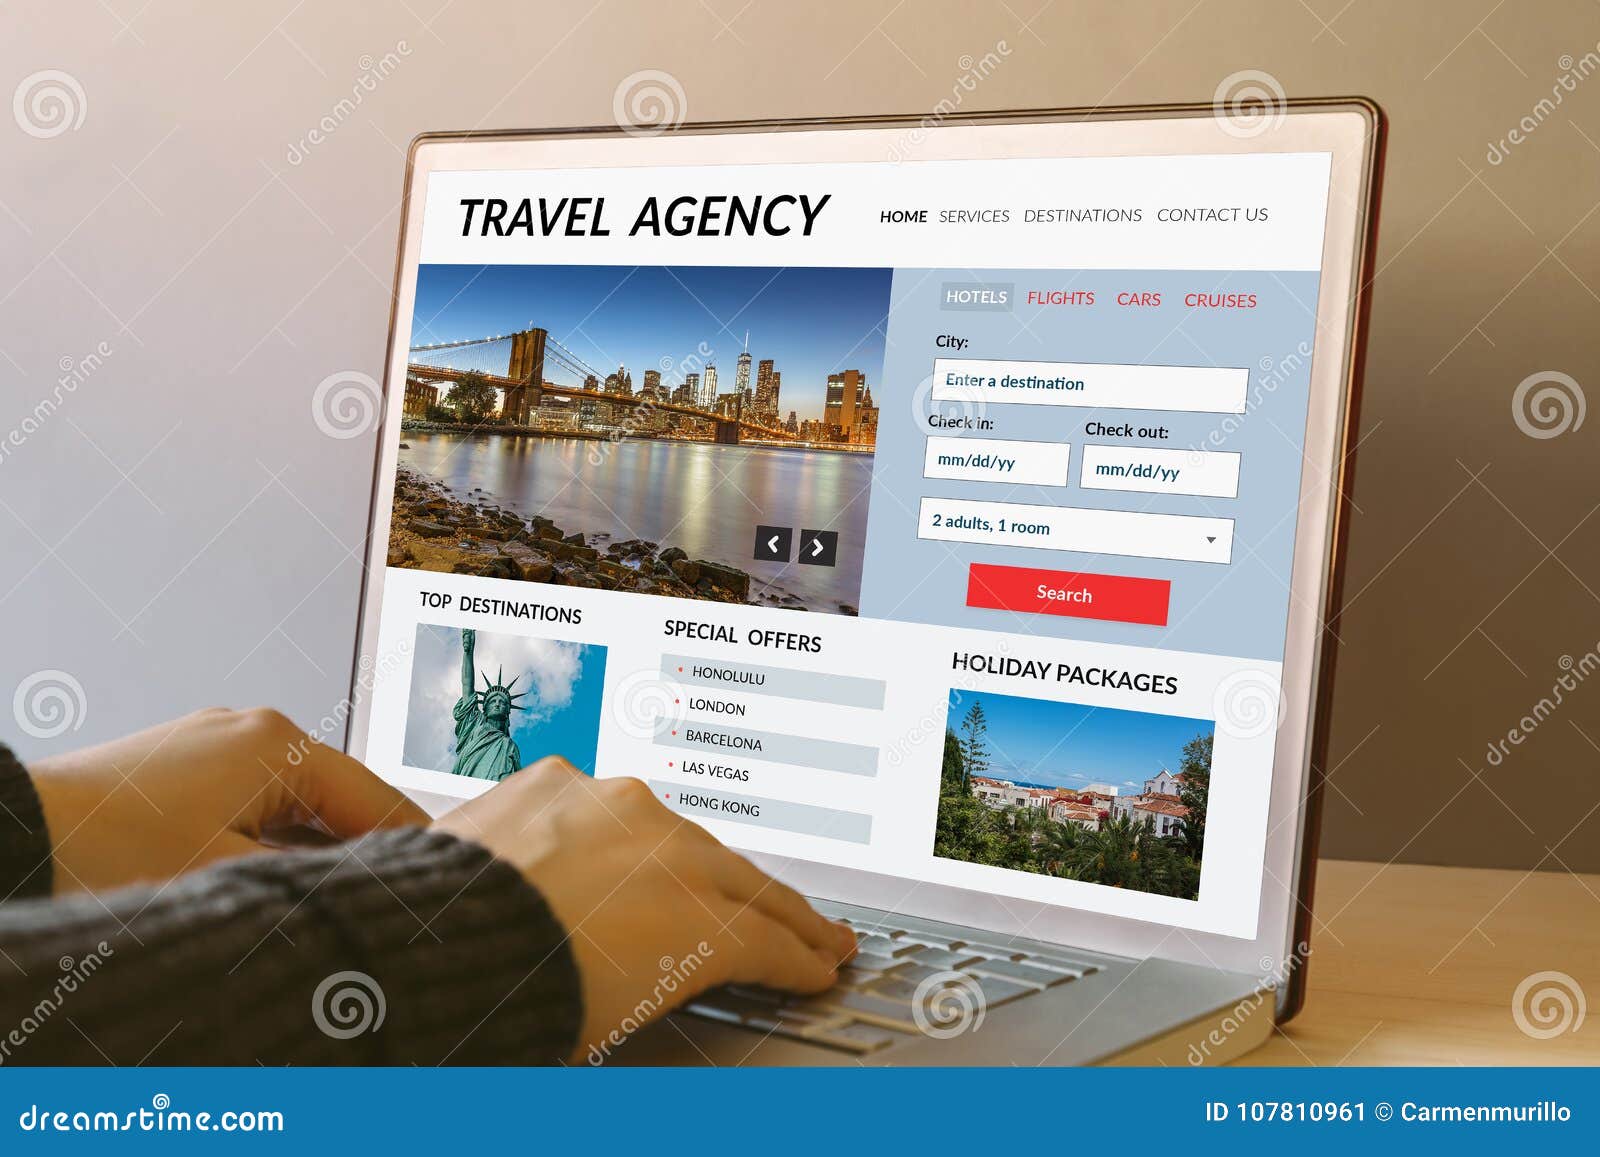 travel agency concept on laptop computer screen